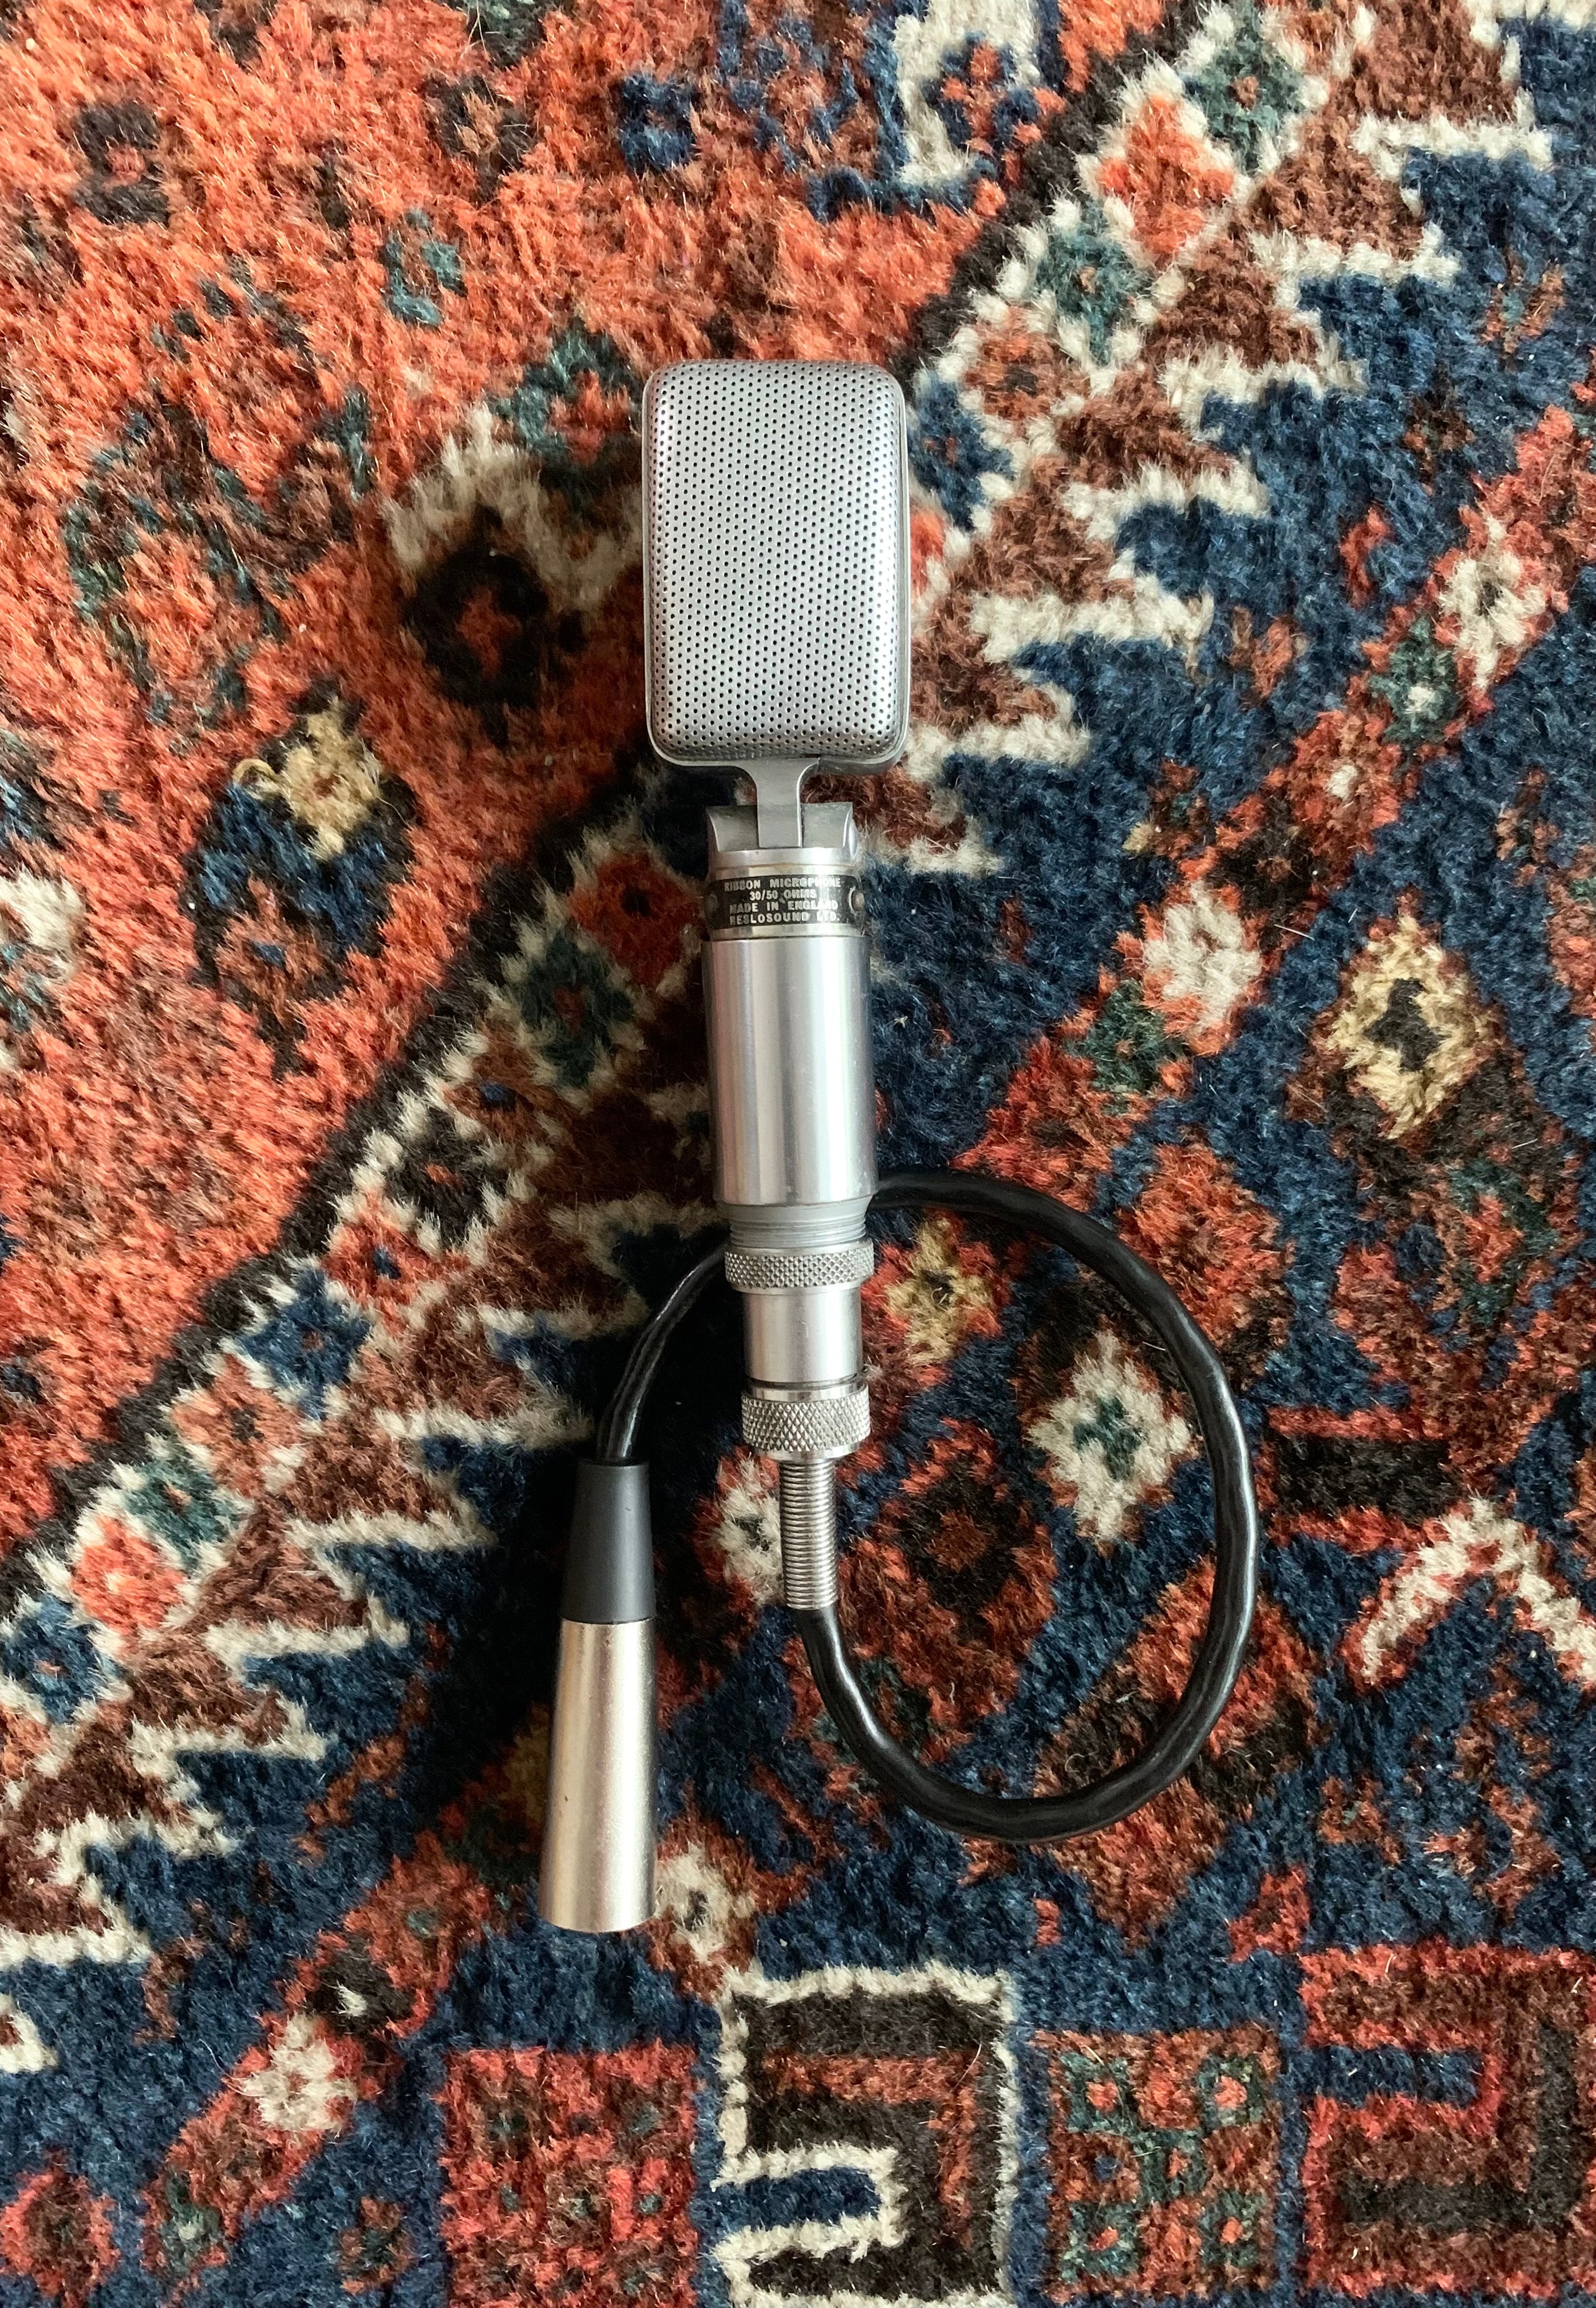 Reslo RB Ribbon Microphone